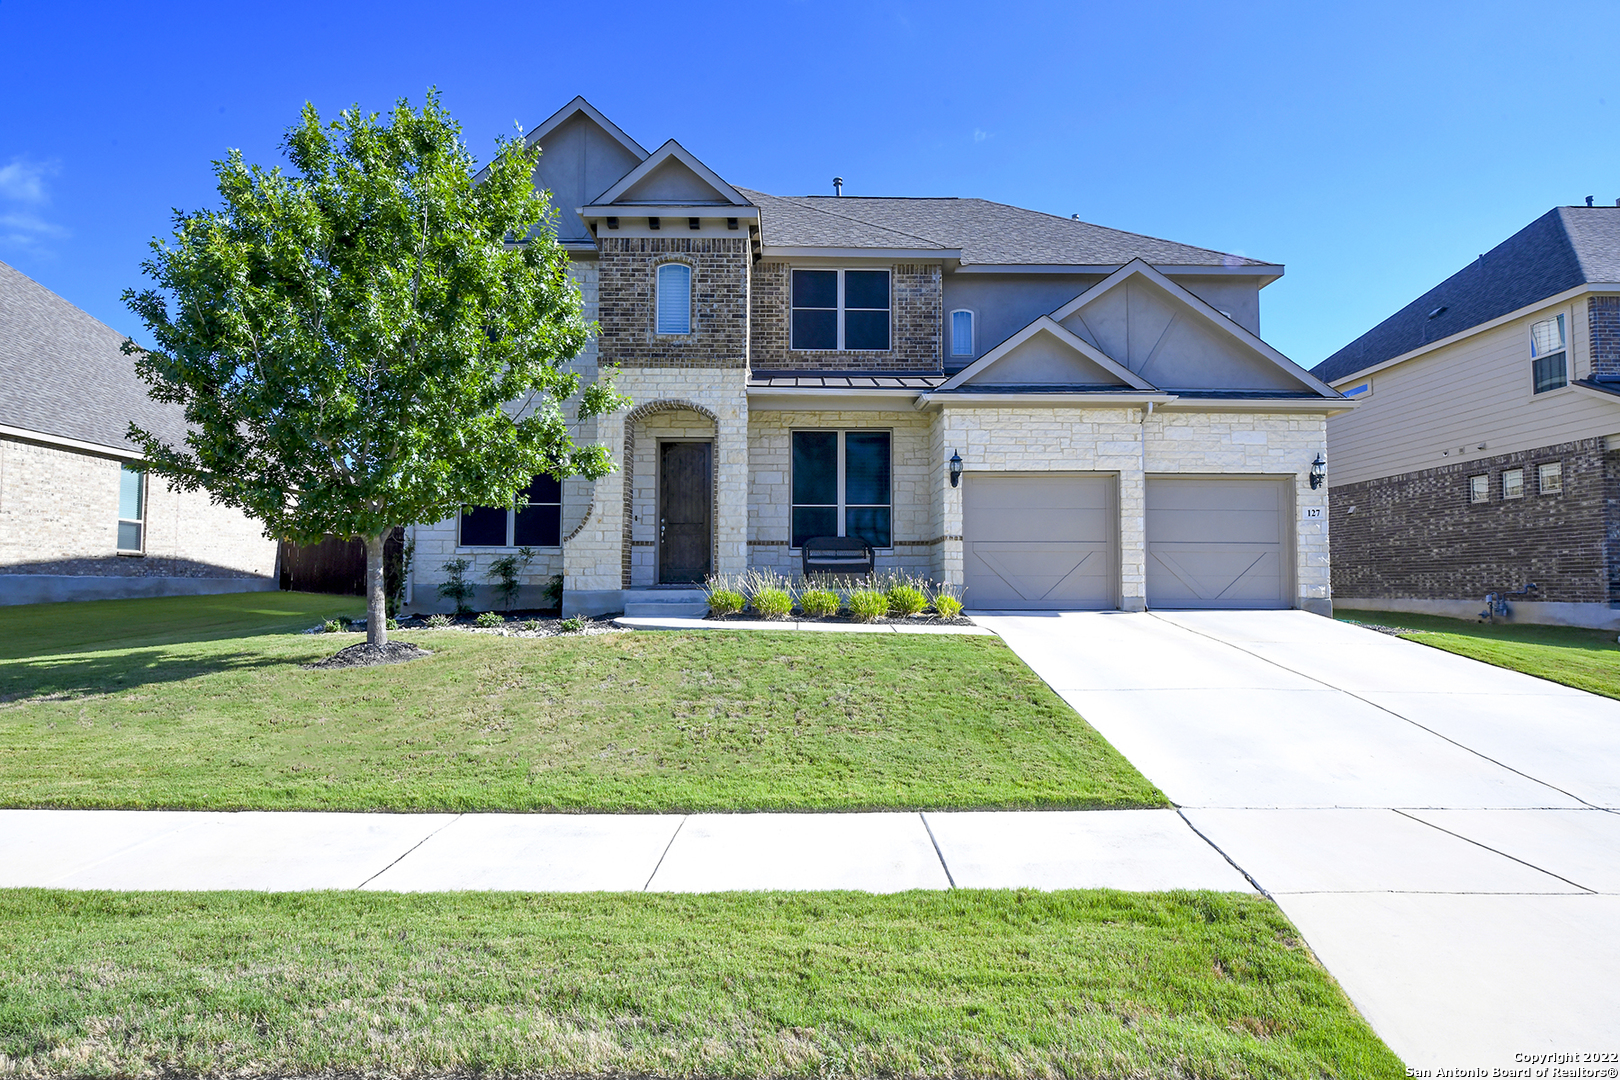 Welcome Home to this meticulously maintained 5 br, 3 1/2 ba, situated in the highly sought-after community of Boerne, Texas! This stunning home features 2 living areas, a game room, media room, and a private study. An open floor plan with soaring ceilings created an exceptional space to entertain, complete with a sunlit filled kitchen/breakfast room, all overlooking the family room. The primary bedroom is downstairs, while the remaining bedrooms + game room & media room are upstairs, making for a prime living experience. Spacious bedrooms with plenty of storage & walk-in closets. Enjoy your Hill Country sunsets on the back patio, in your own private pool. Home is equipped with solar screens! A superior location with nearby outdoor recreation, shopping, and dining. Zoned to top-rated Boerne ISD schools. Schedule a viewing today, and fall in love!